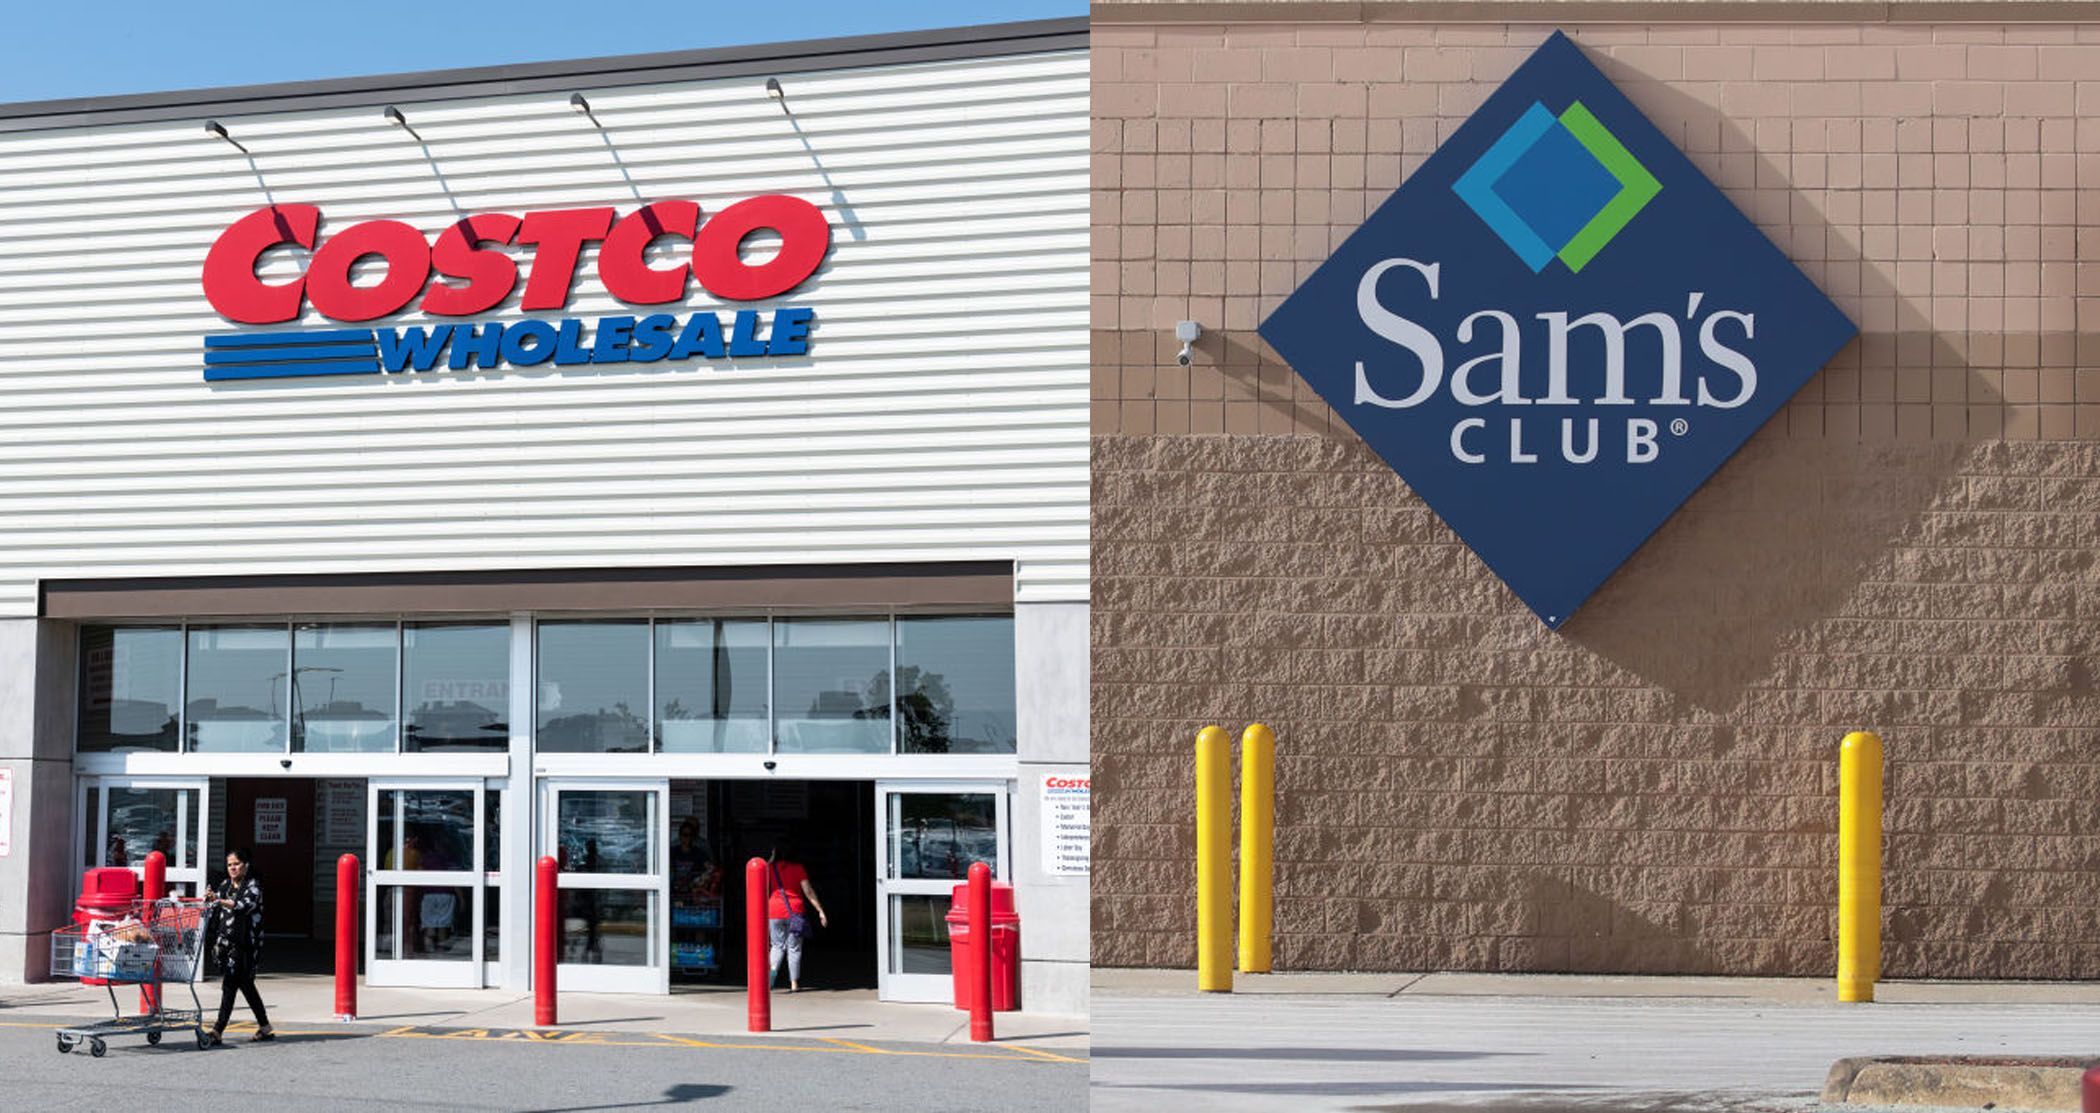 How Sam's Club's Exclusive Deal with T-Mobile Shakes Up the Battle with Costco Over Shopper Loyalty